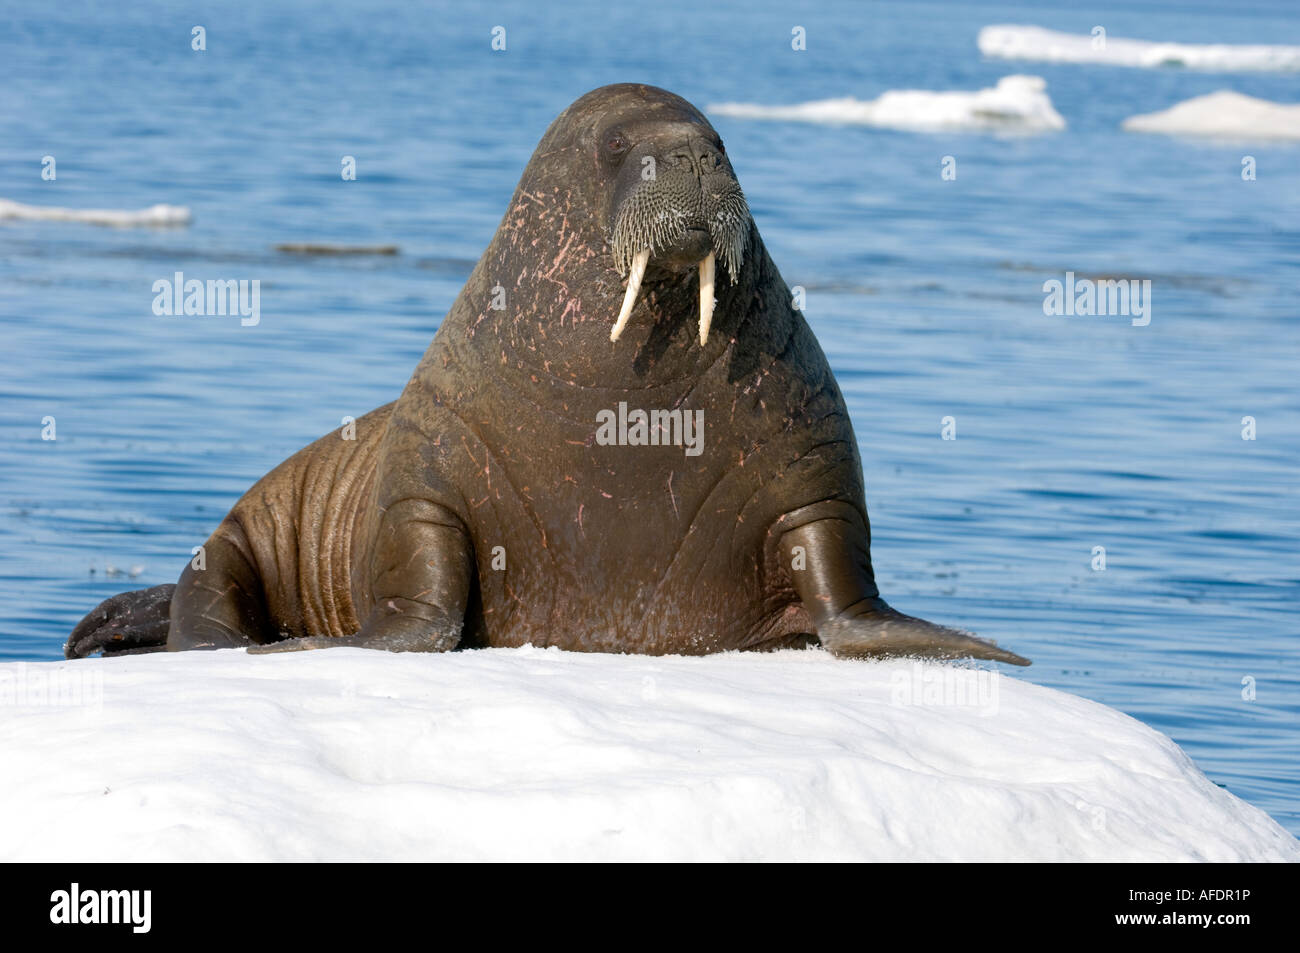 Animals of the Ice: Walruses